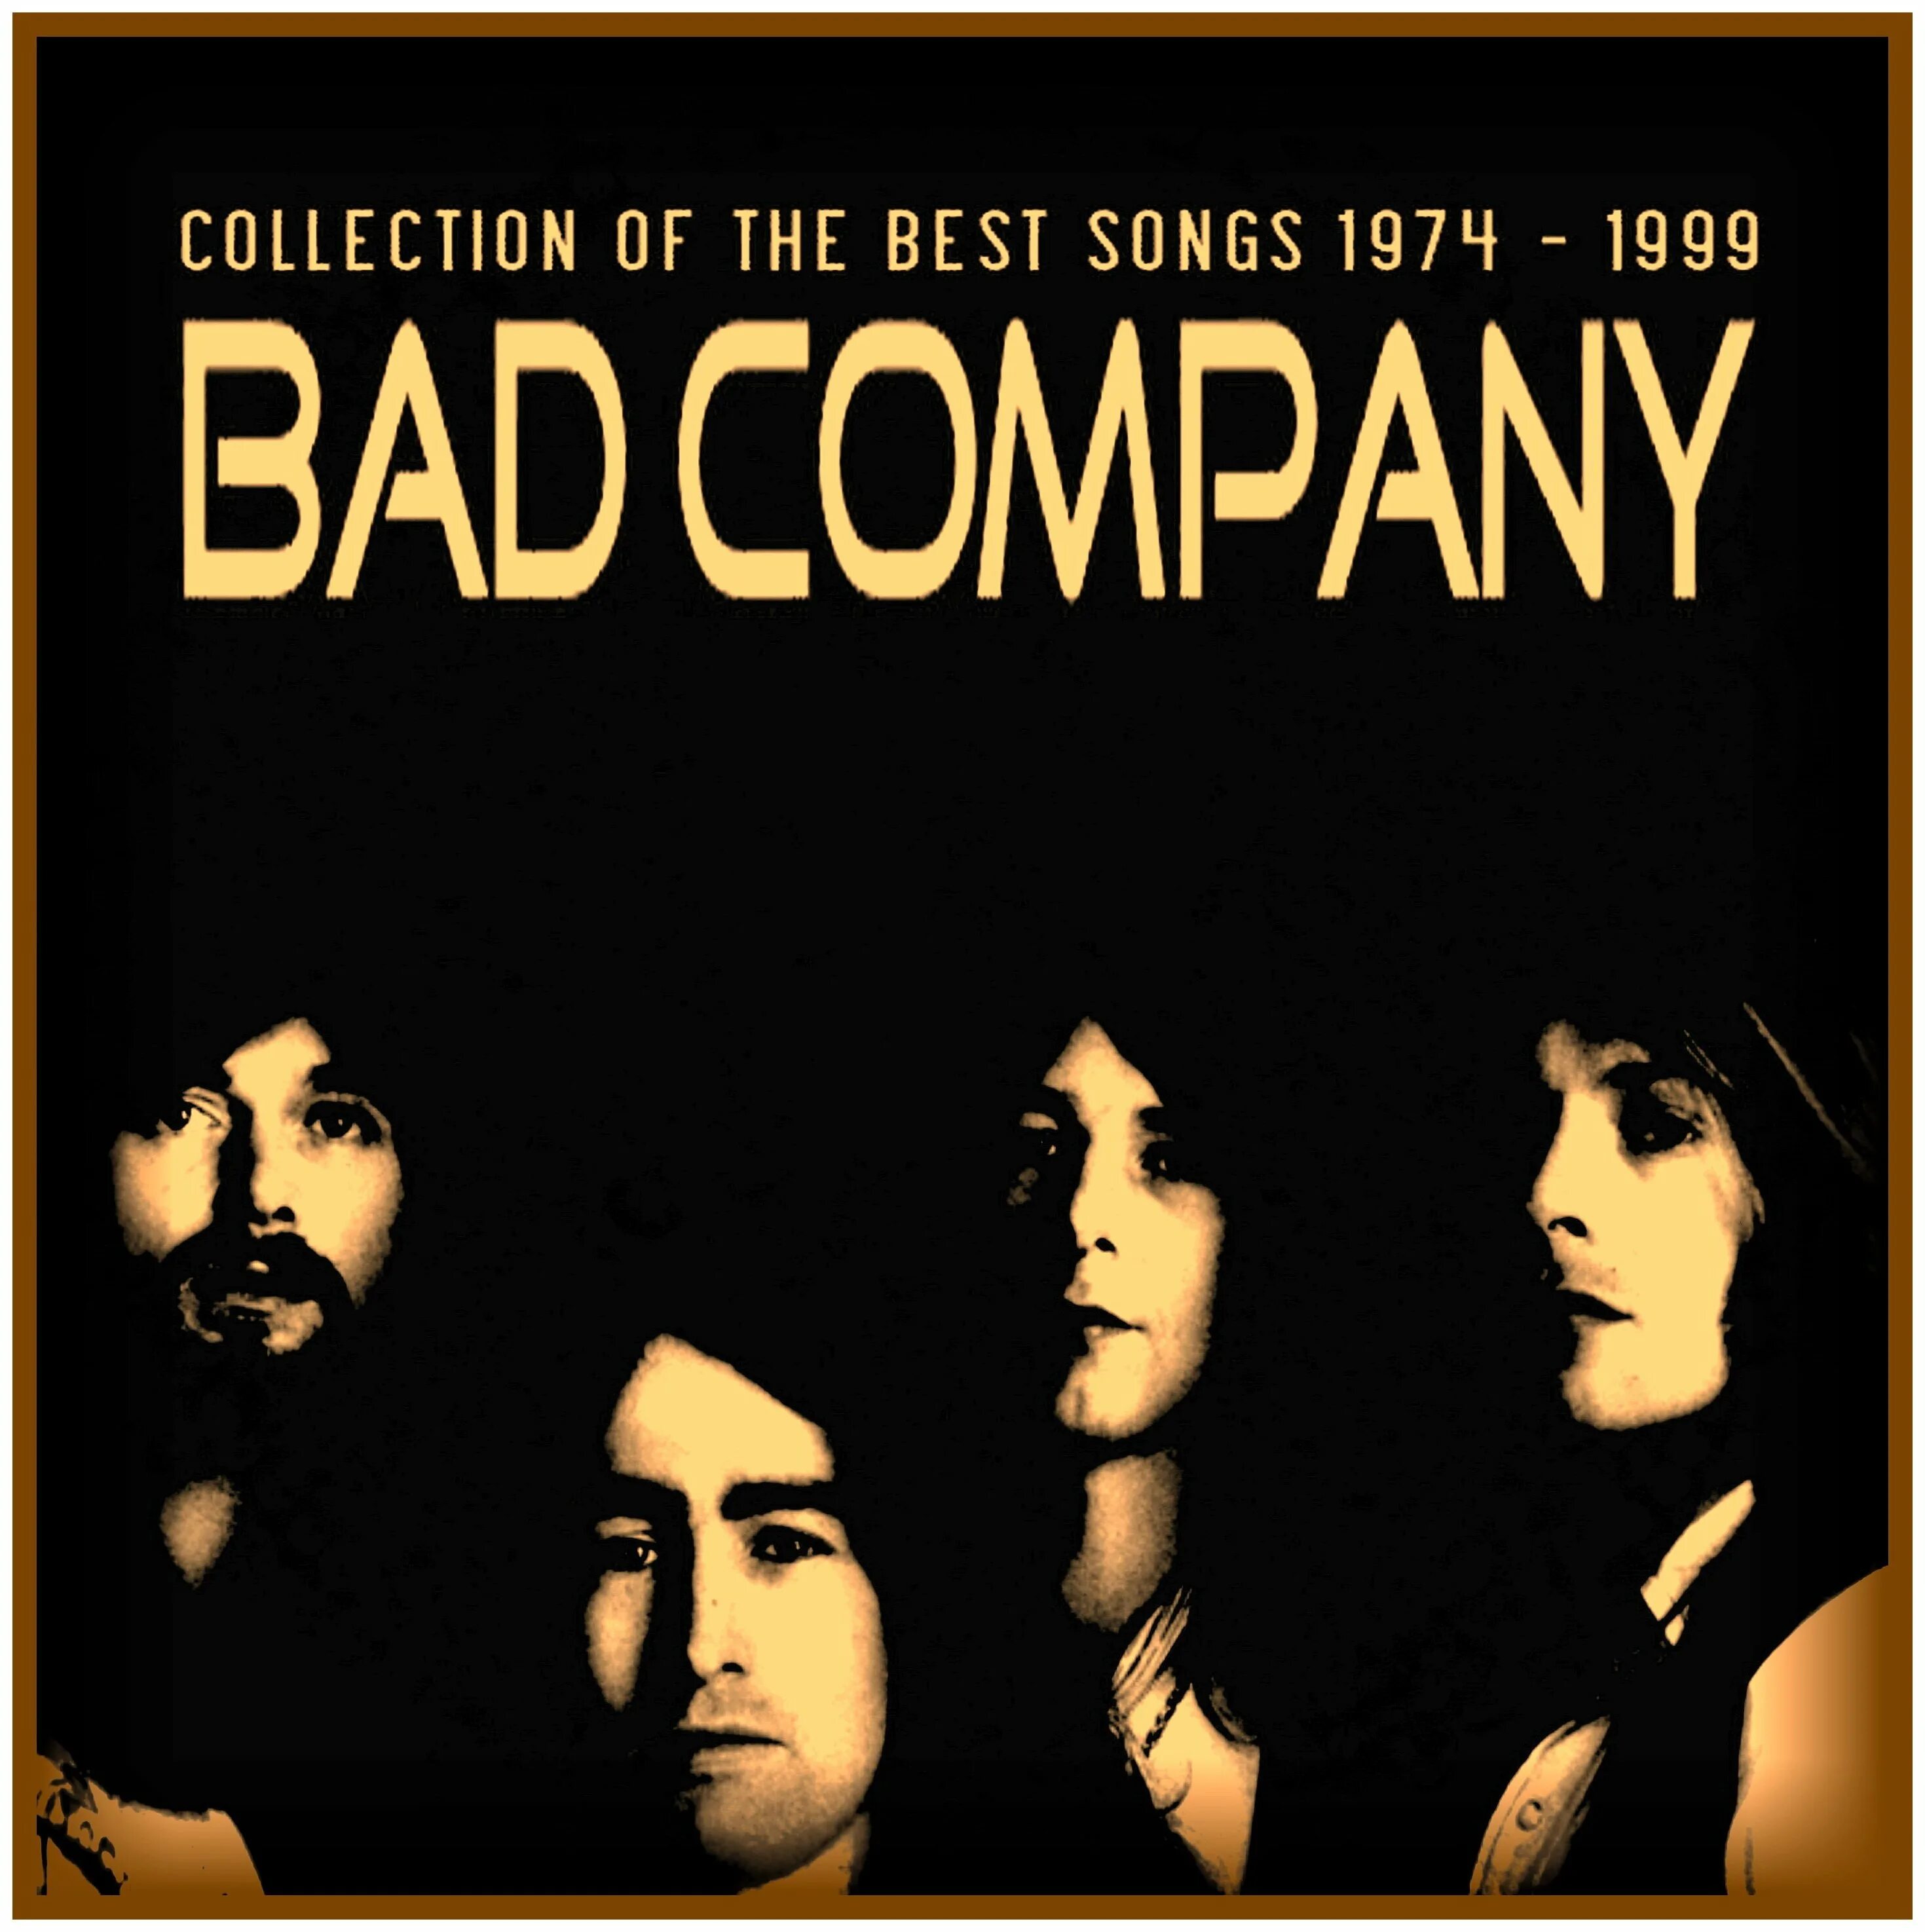 Co collection. Bad Company album 1974. Группа Bad Company альбомы. Bad Company 1999. Bad Company collection of the best Songs 1974-1999 4cd 2011.